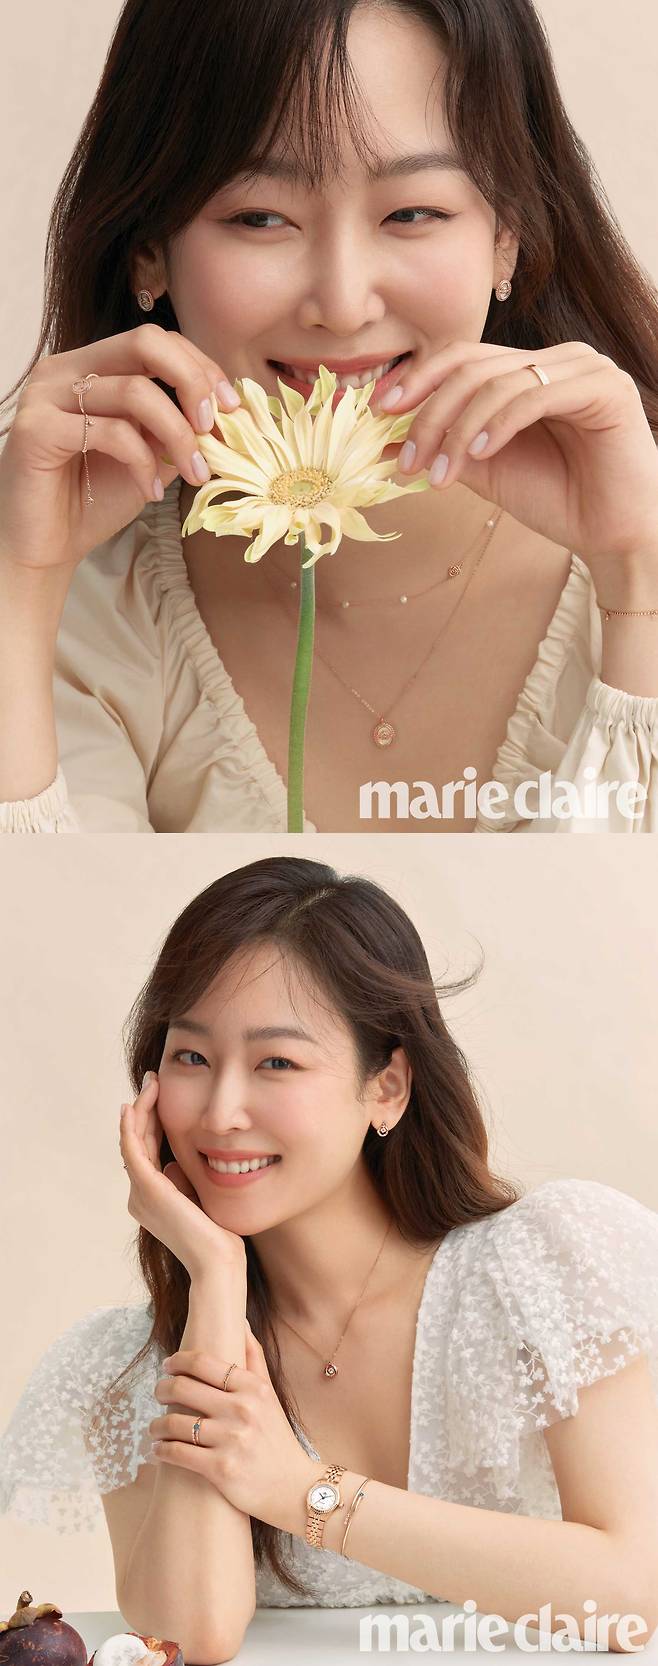 Actor Seo Hyun-jin showed off her charm full of lovelinessThe photo, which was released through the July issue of magazine Marie Claire, captures romantic moments of Roco Queen Seo Hyun-jin, who is about to return to TVNs new monthly drama You Are My Spring.Especially, the lovely visual of Seo Hyun-jin, which reminds me of the thrilling First Love, and the unique Elegance and Romantic sensibility of Rosemont harmonized, creating a fresh and romantic summer picture like a full bloom.Seo Hyun-jin captured the attention of those who delicately express various emotional lines with the inhaling eyes and expressions of Seo Hyun-jin only in every cut, from the girlish appearance that seemed to look at the lover to the mature woman who is in love and enjoys happiness.In addition, he showed perfect Hello and My Dolly Girlfriend look with clock and jewelery in costumes that show vivid colors such as white, pink, blue and yellow and lovely detail.In the charming blouse with lovely shirring details, the signature rose pendant gave points with an attractive necklace and earrings, maximizing the romantic mood.In addition, the pink lace blouse, off-shoulder dress, square neck dress, and other feminine designs, Rosemonts Elegance Rose Gold jewelery and clock are mixed in various ways to show the return of the Roco Queen.I expressed various emotions such as love and joy in a delicate expression, acting, and gestures, and gave me a sense of immersion as if I were watching a drama on the other hand.Meanwhile, Seo Hyun-jin will play the role of hotel concierge manager Kang Da-jung in You Are My Spring to show a different healing romance.It will be broadcasted at 9 pm on July 5th.Photo Rosemong